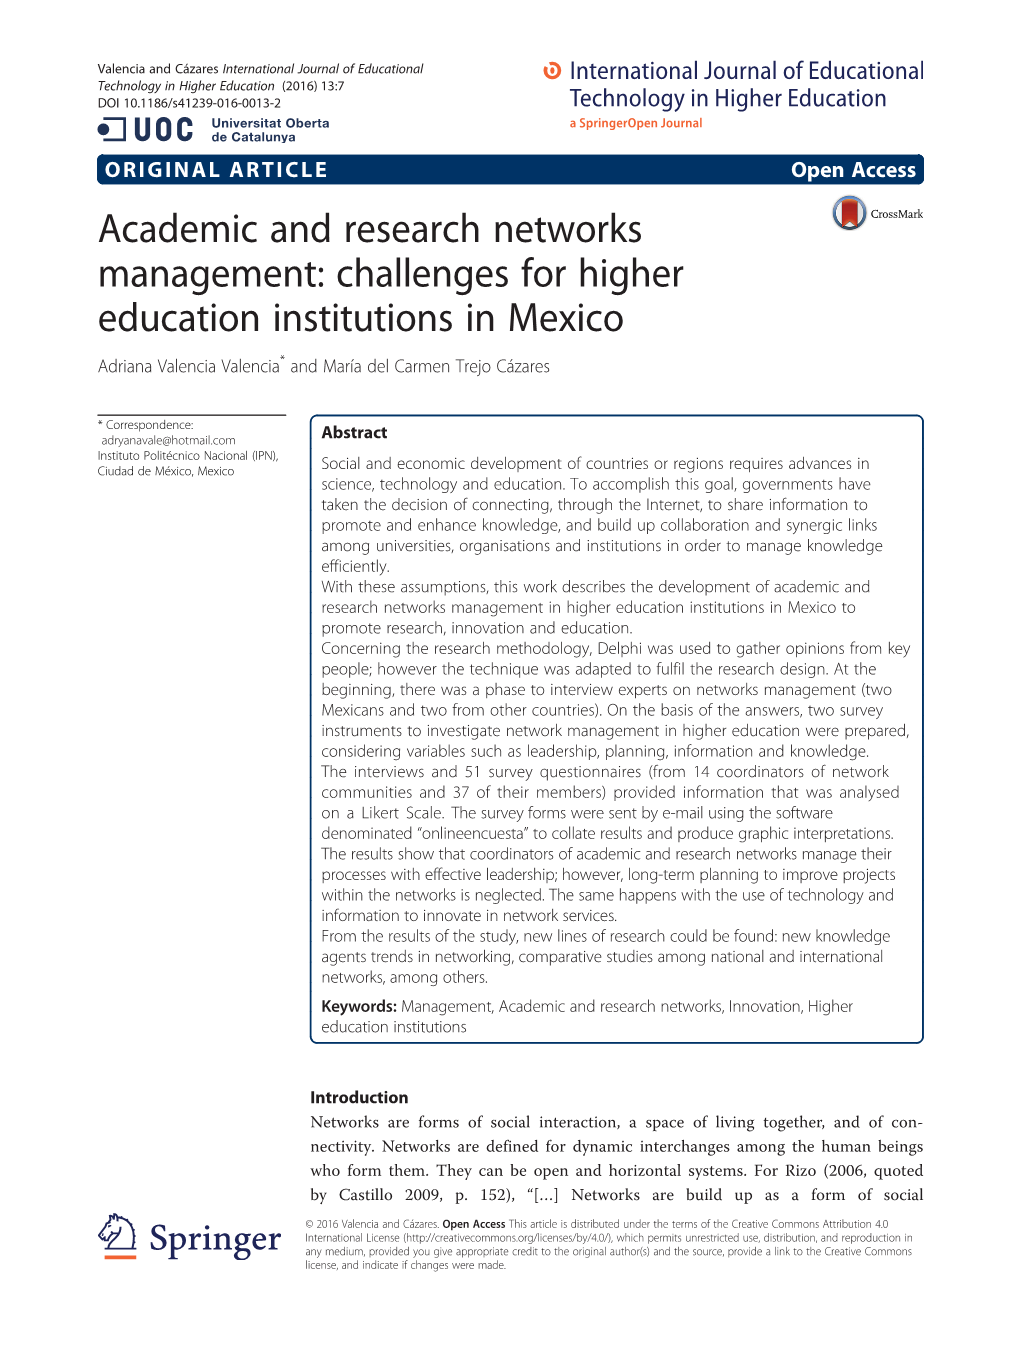 Academic and Research Networks Management: Challenges for Higher Education Institutions in Mexico Adriana Valencia Valencia* and María Del Carmen Trejo Cázares